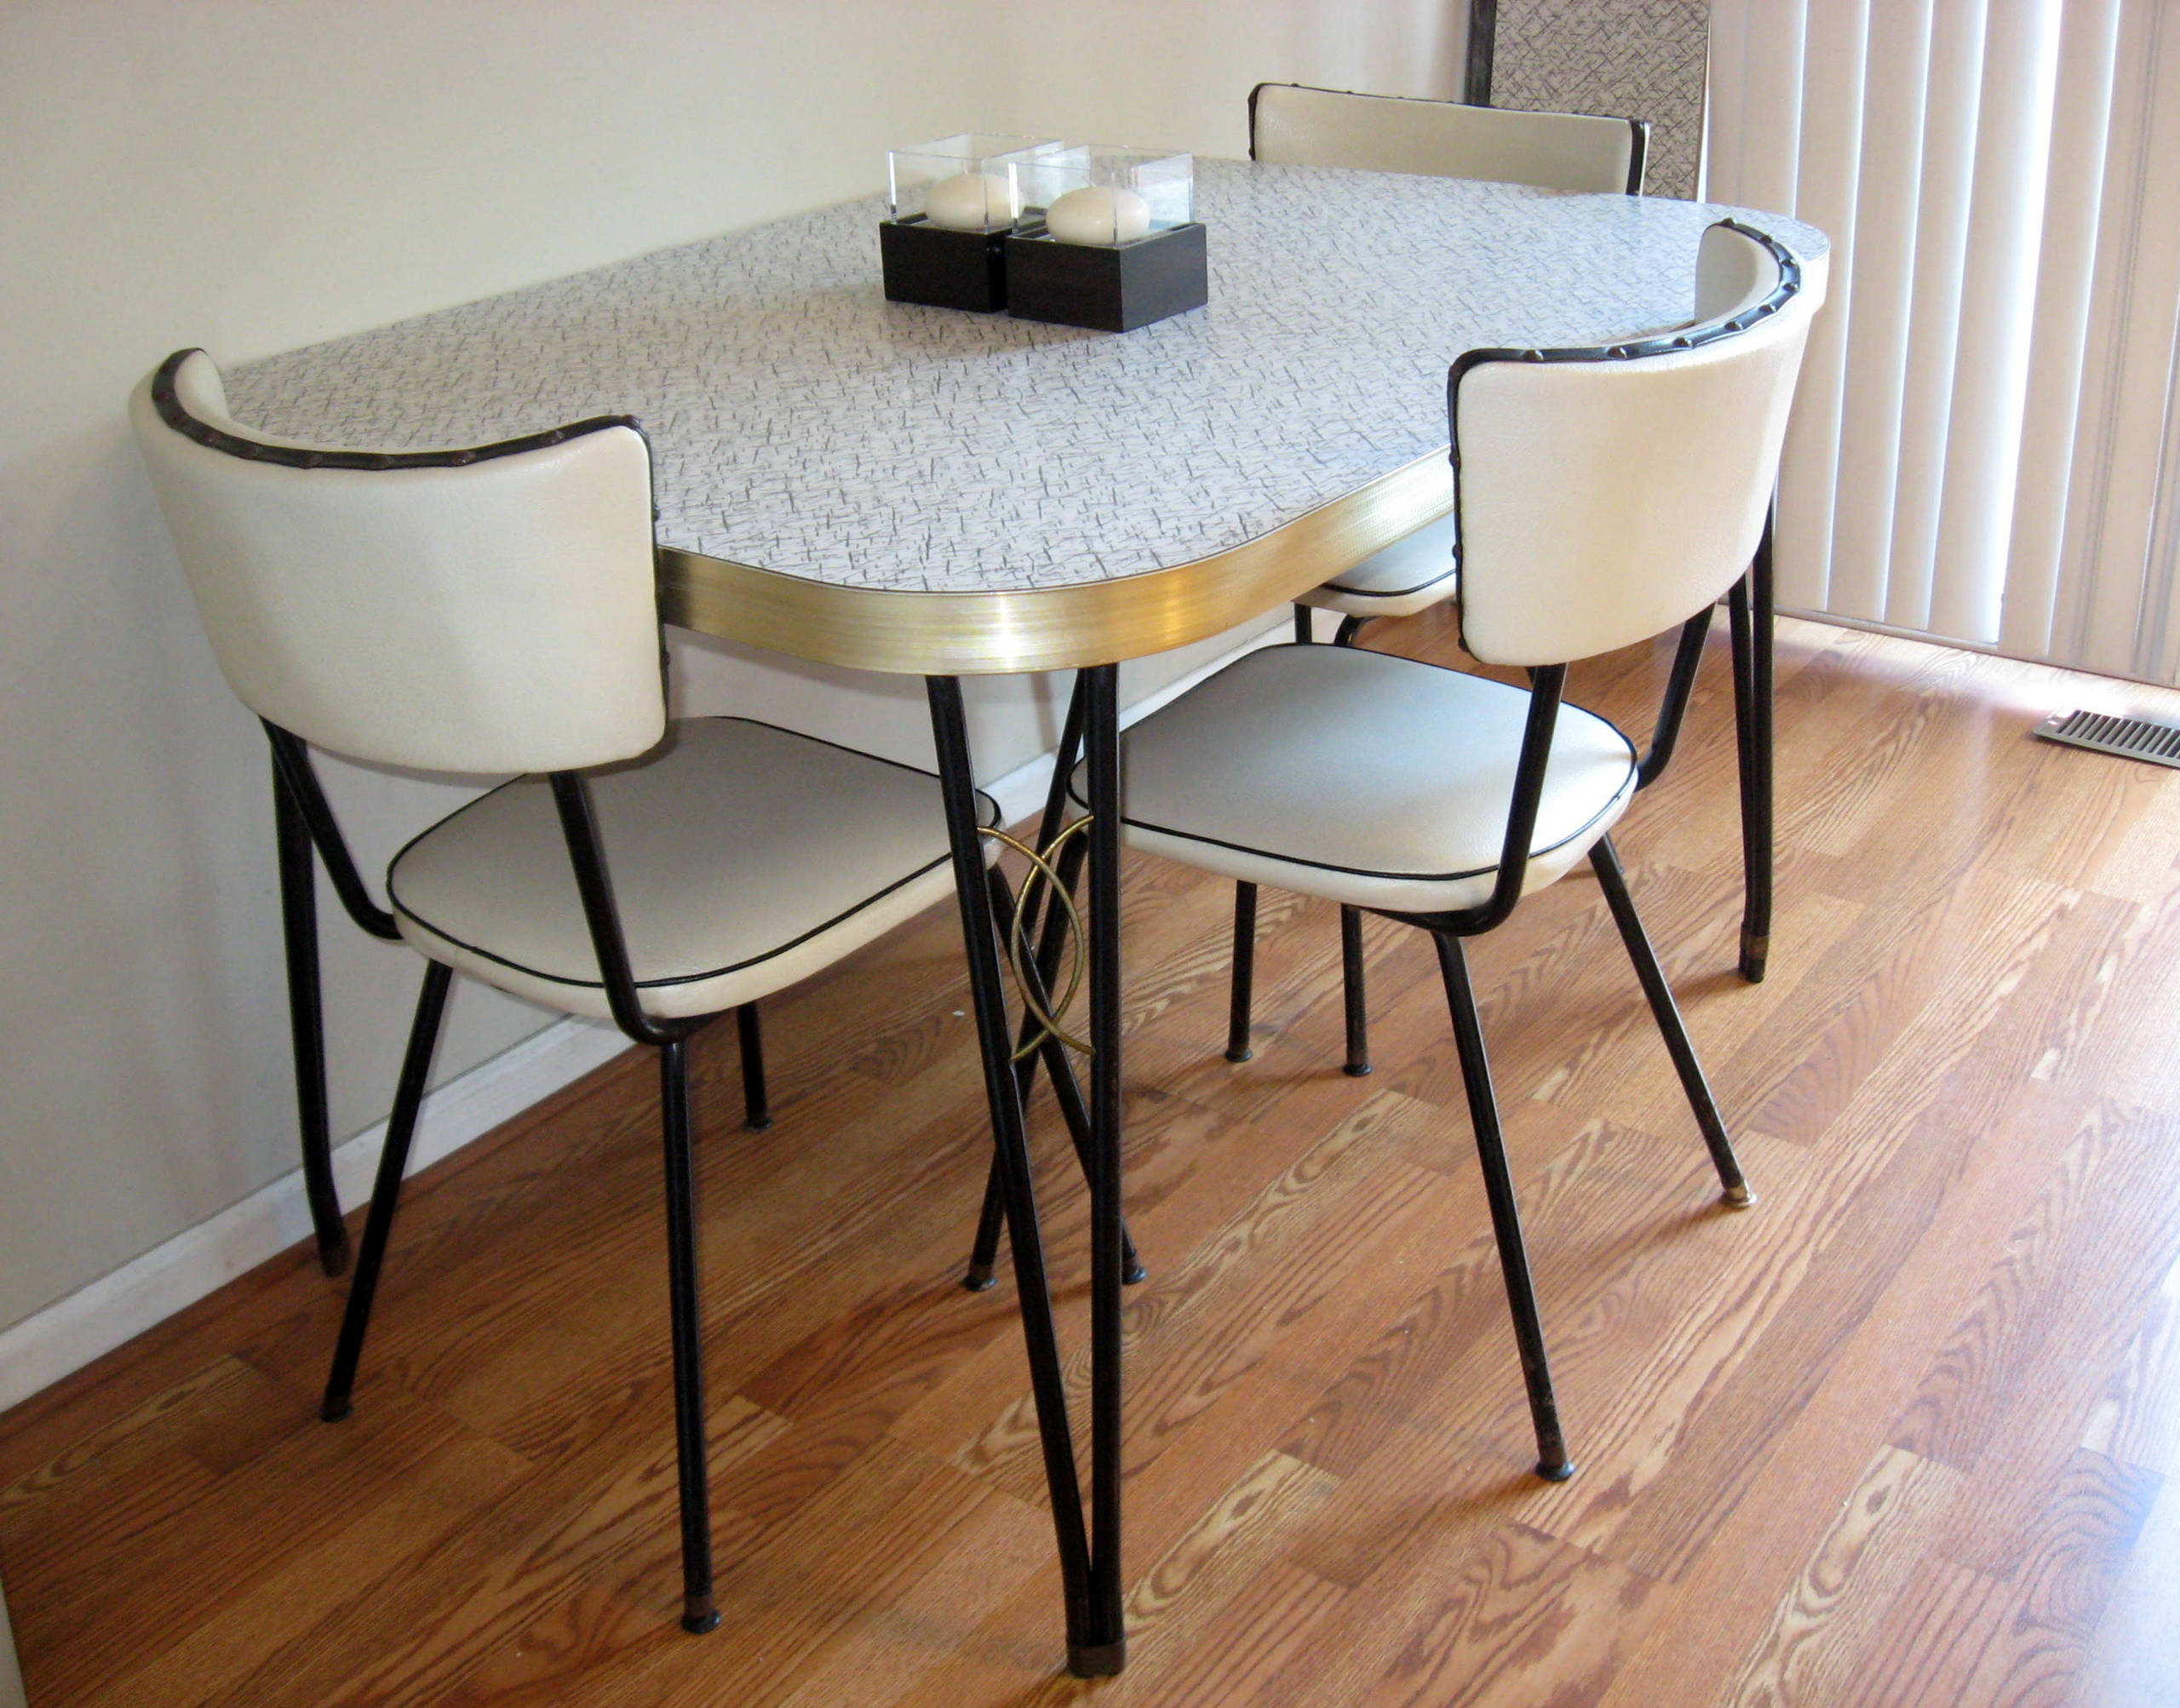 Retro Kitchen Table And Chairs Visualhunt, Old Metal Kitchen Table And Chairs